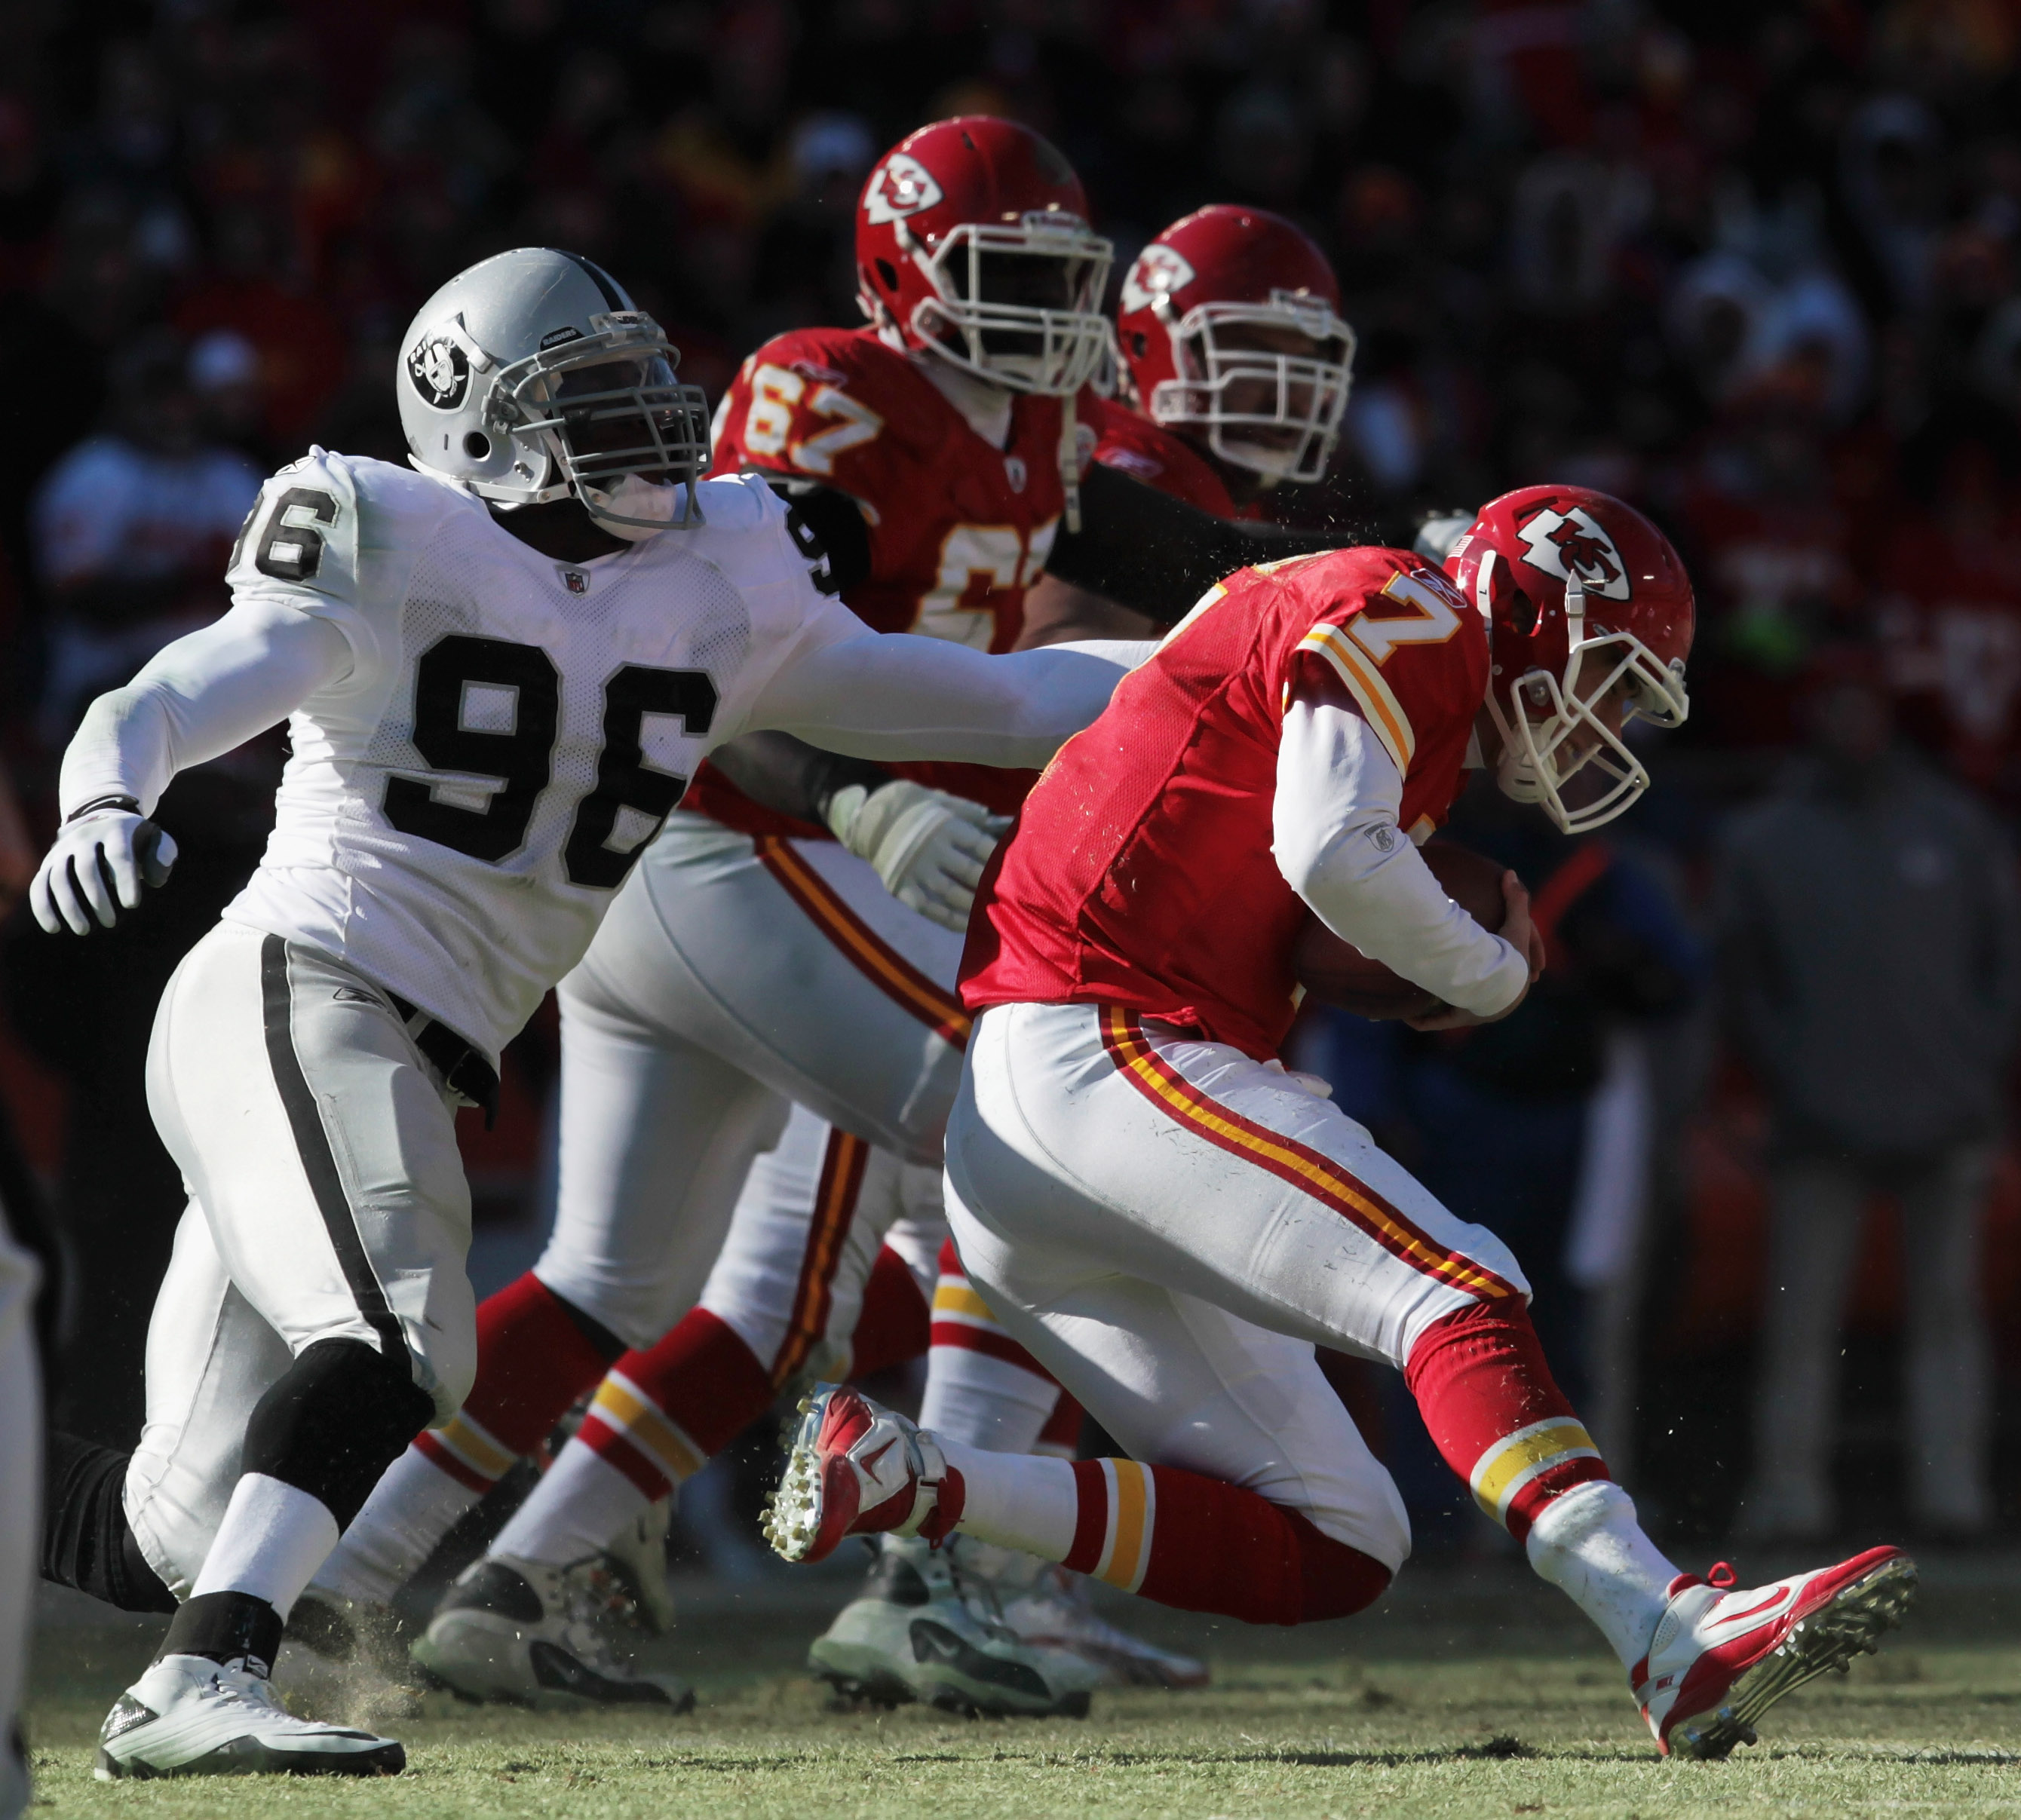 KANSAS CITY, MO - JANUARY 02:  Quarterback Matt Cassel #7 of the Kansas City Chiefs is sacked by Kamerion Wimbley #96 of the Oakland Raiders during the game on January 2, 2011 at Arrowhead Stadium in Kansas City, Missouri.  (Photo by Jamie Squire/Getty Im